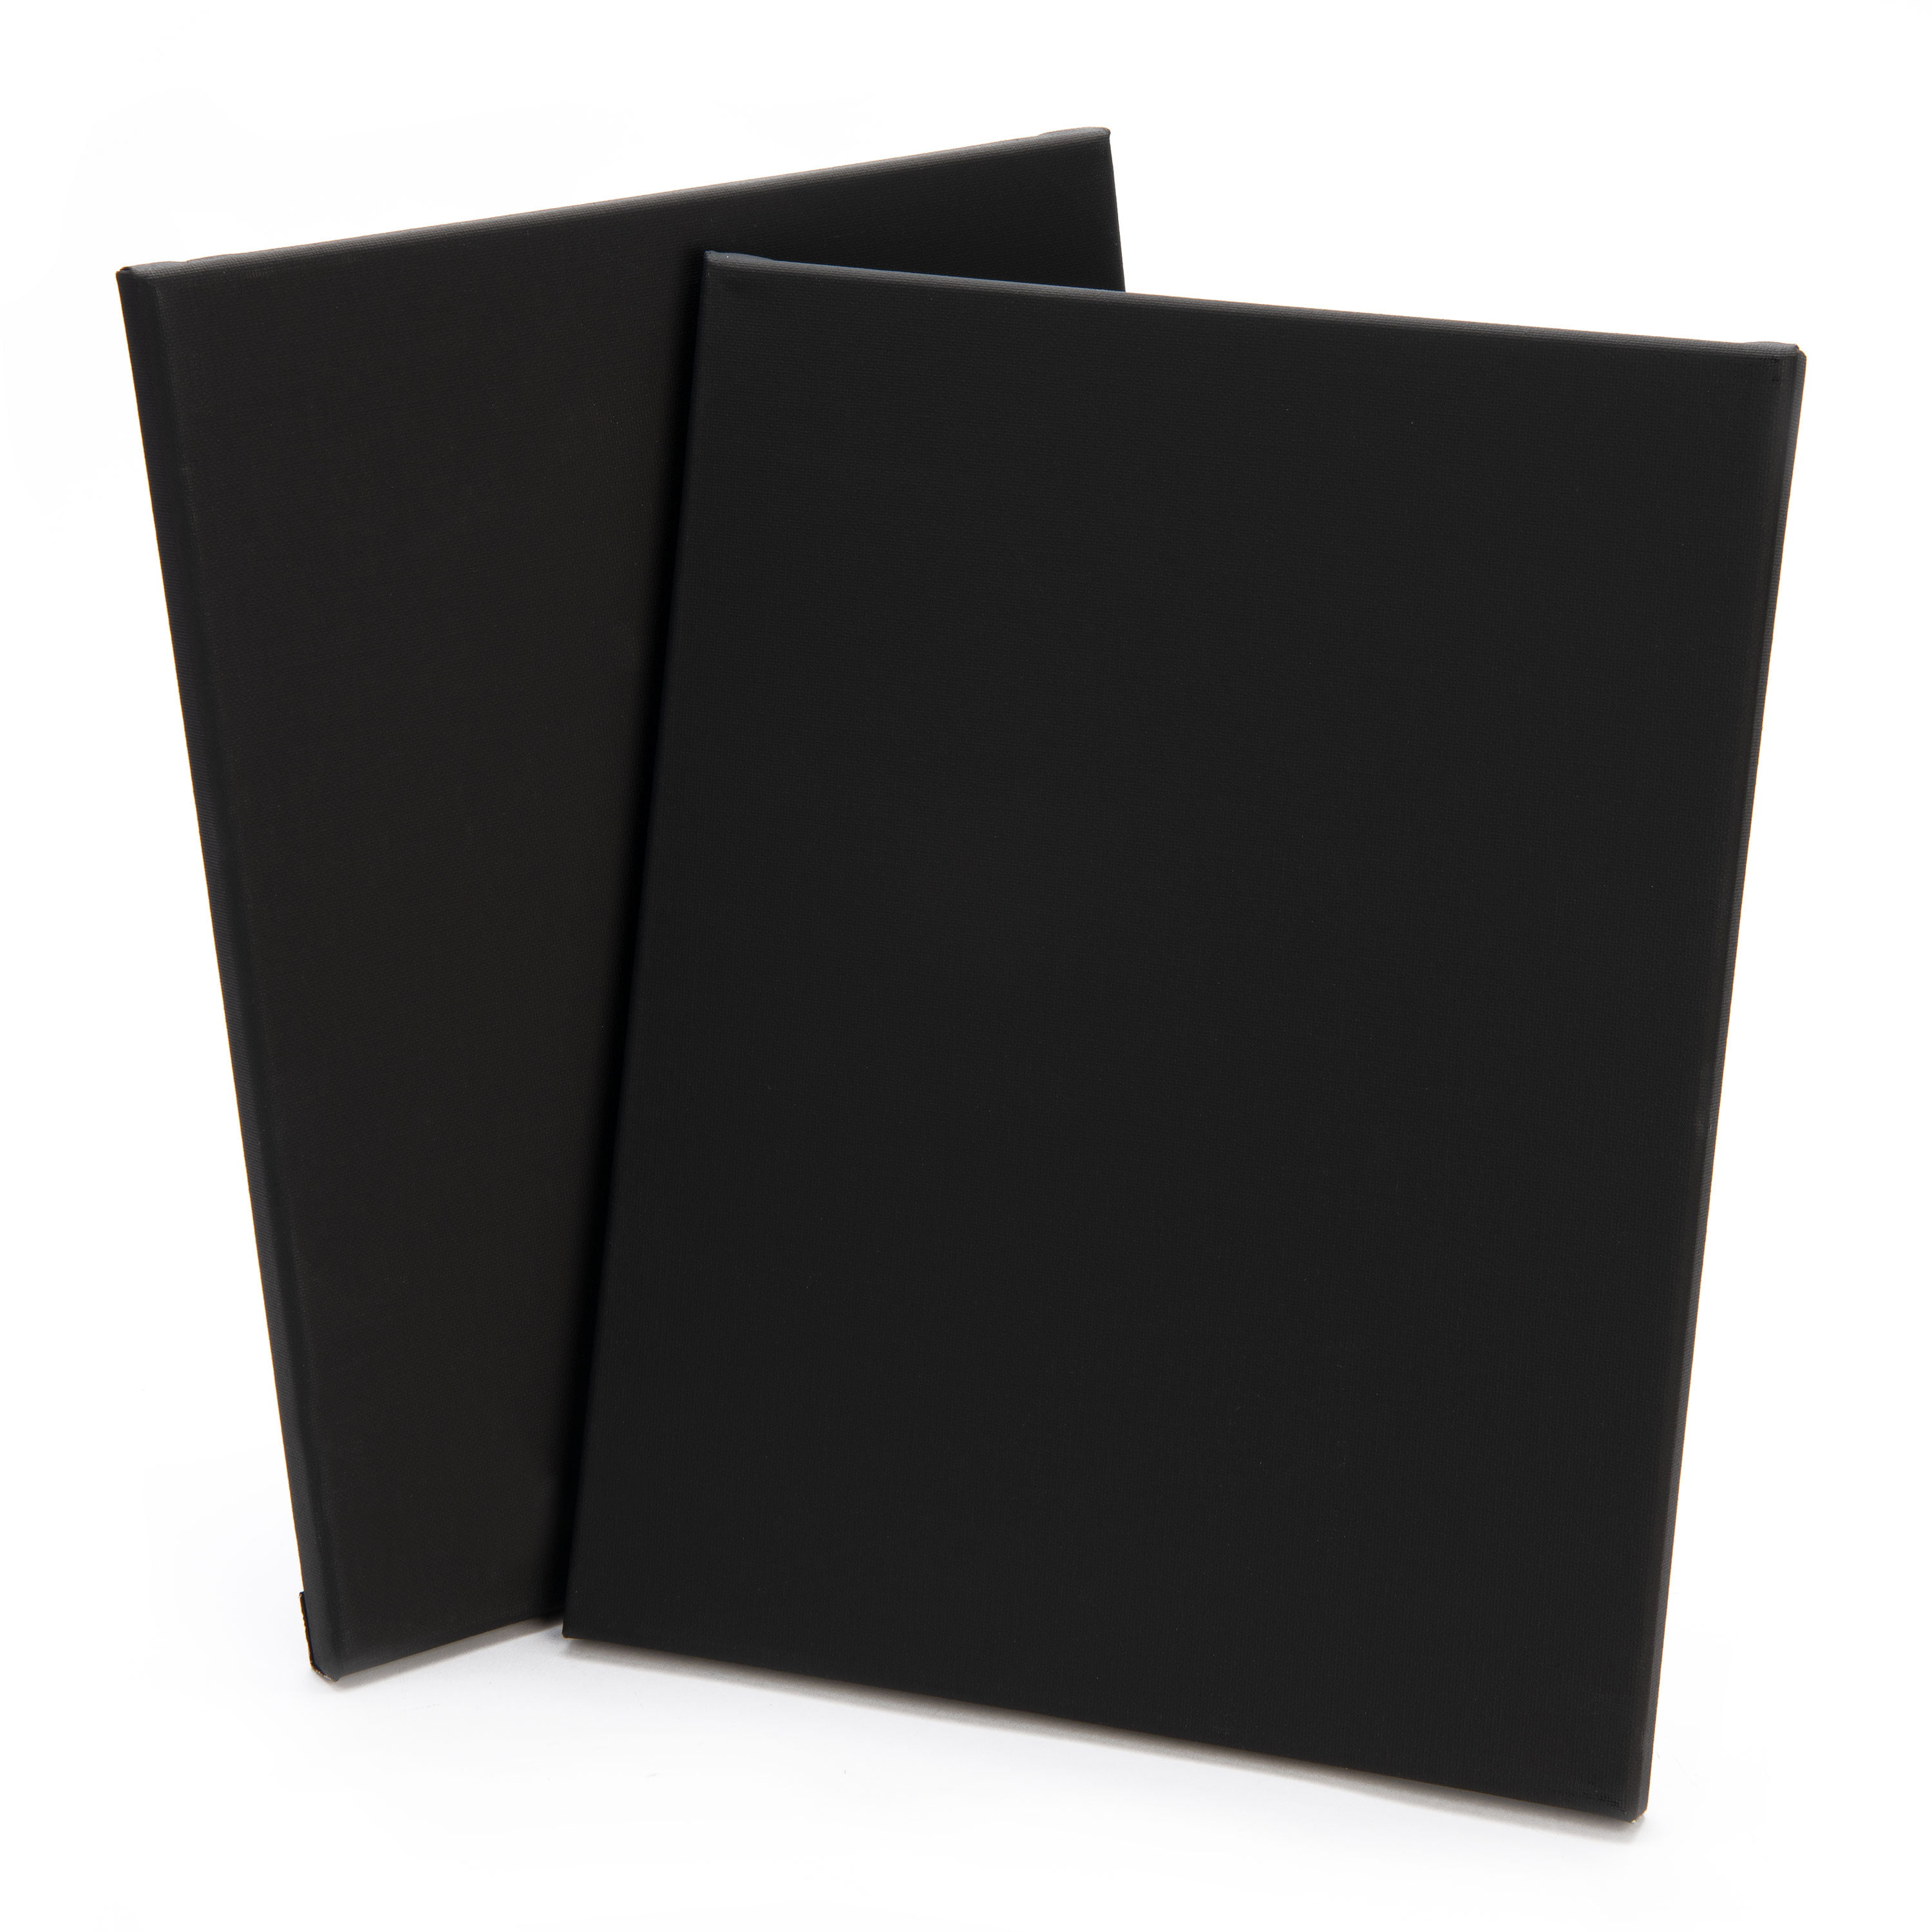  PHOENIX Black Stretched Canvas, 8x10 Inch/4 Pack - 3/4 Inch  Profile, 8 Oz Quadruple Gesso Primed 100% Cotton Blank Black Canvases for  Acrylic, Oil, Tempera, Metallic, Neon Painting & Crafts